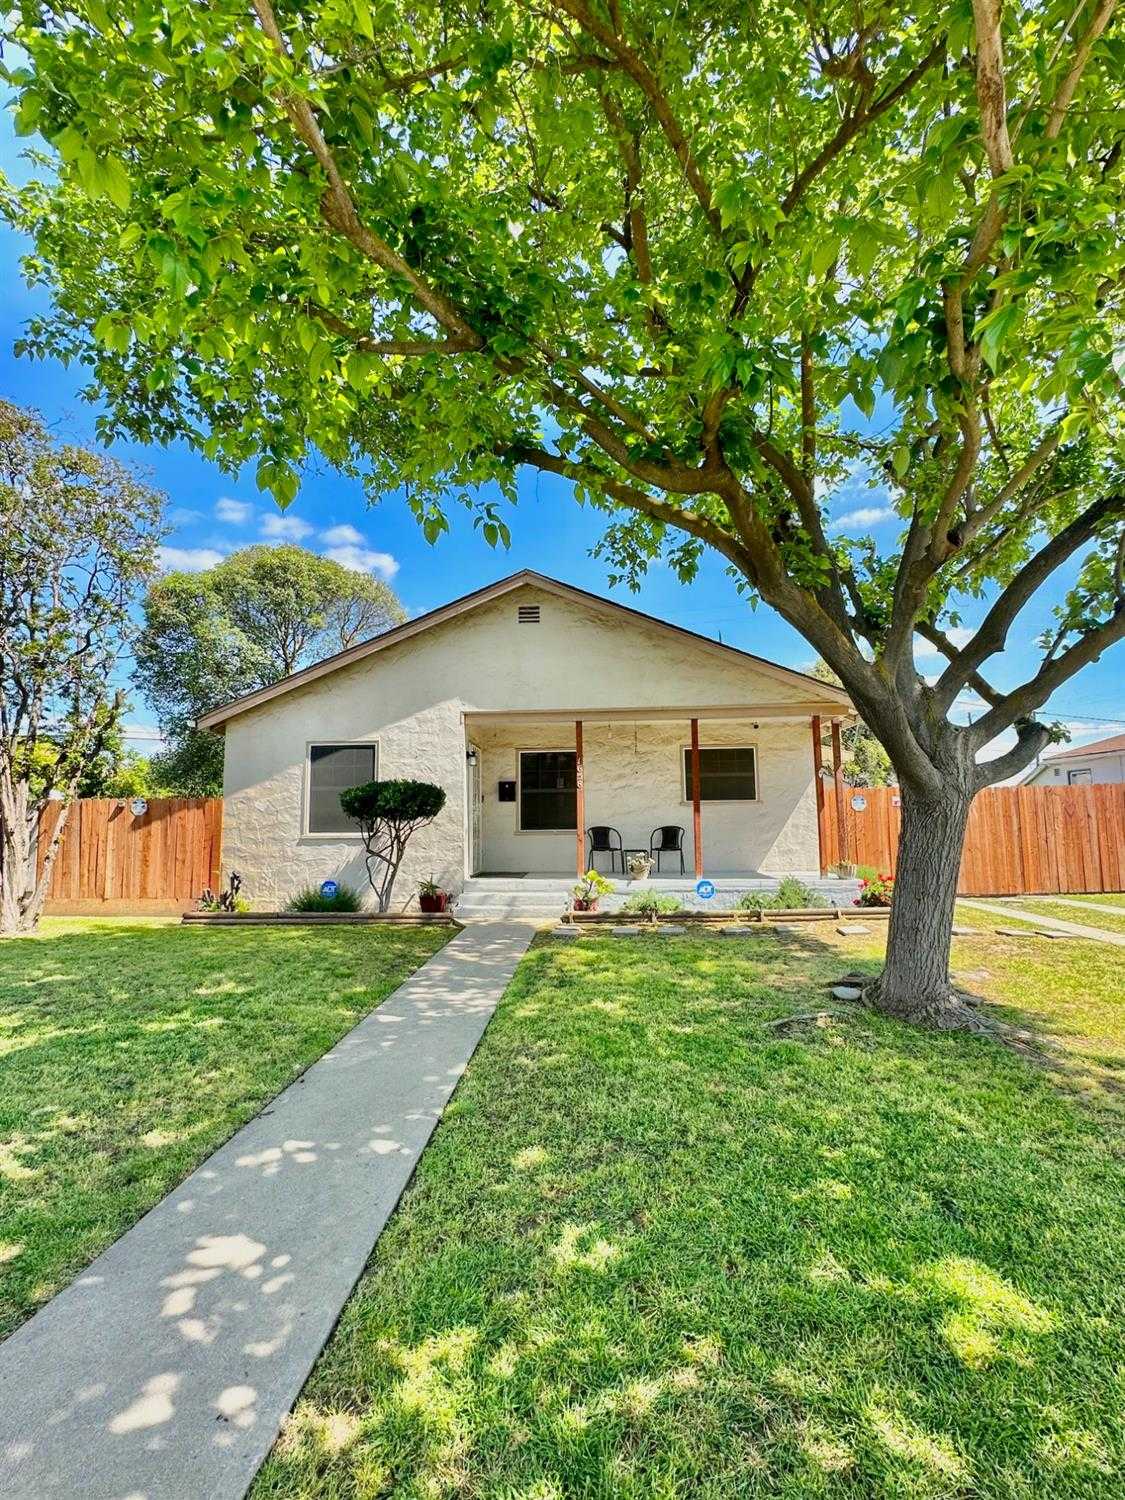 $270,000 - 2Br/1Ba -  for Sale in Merced